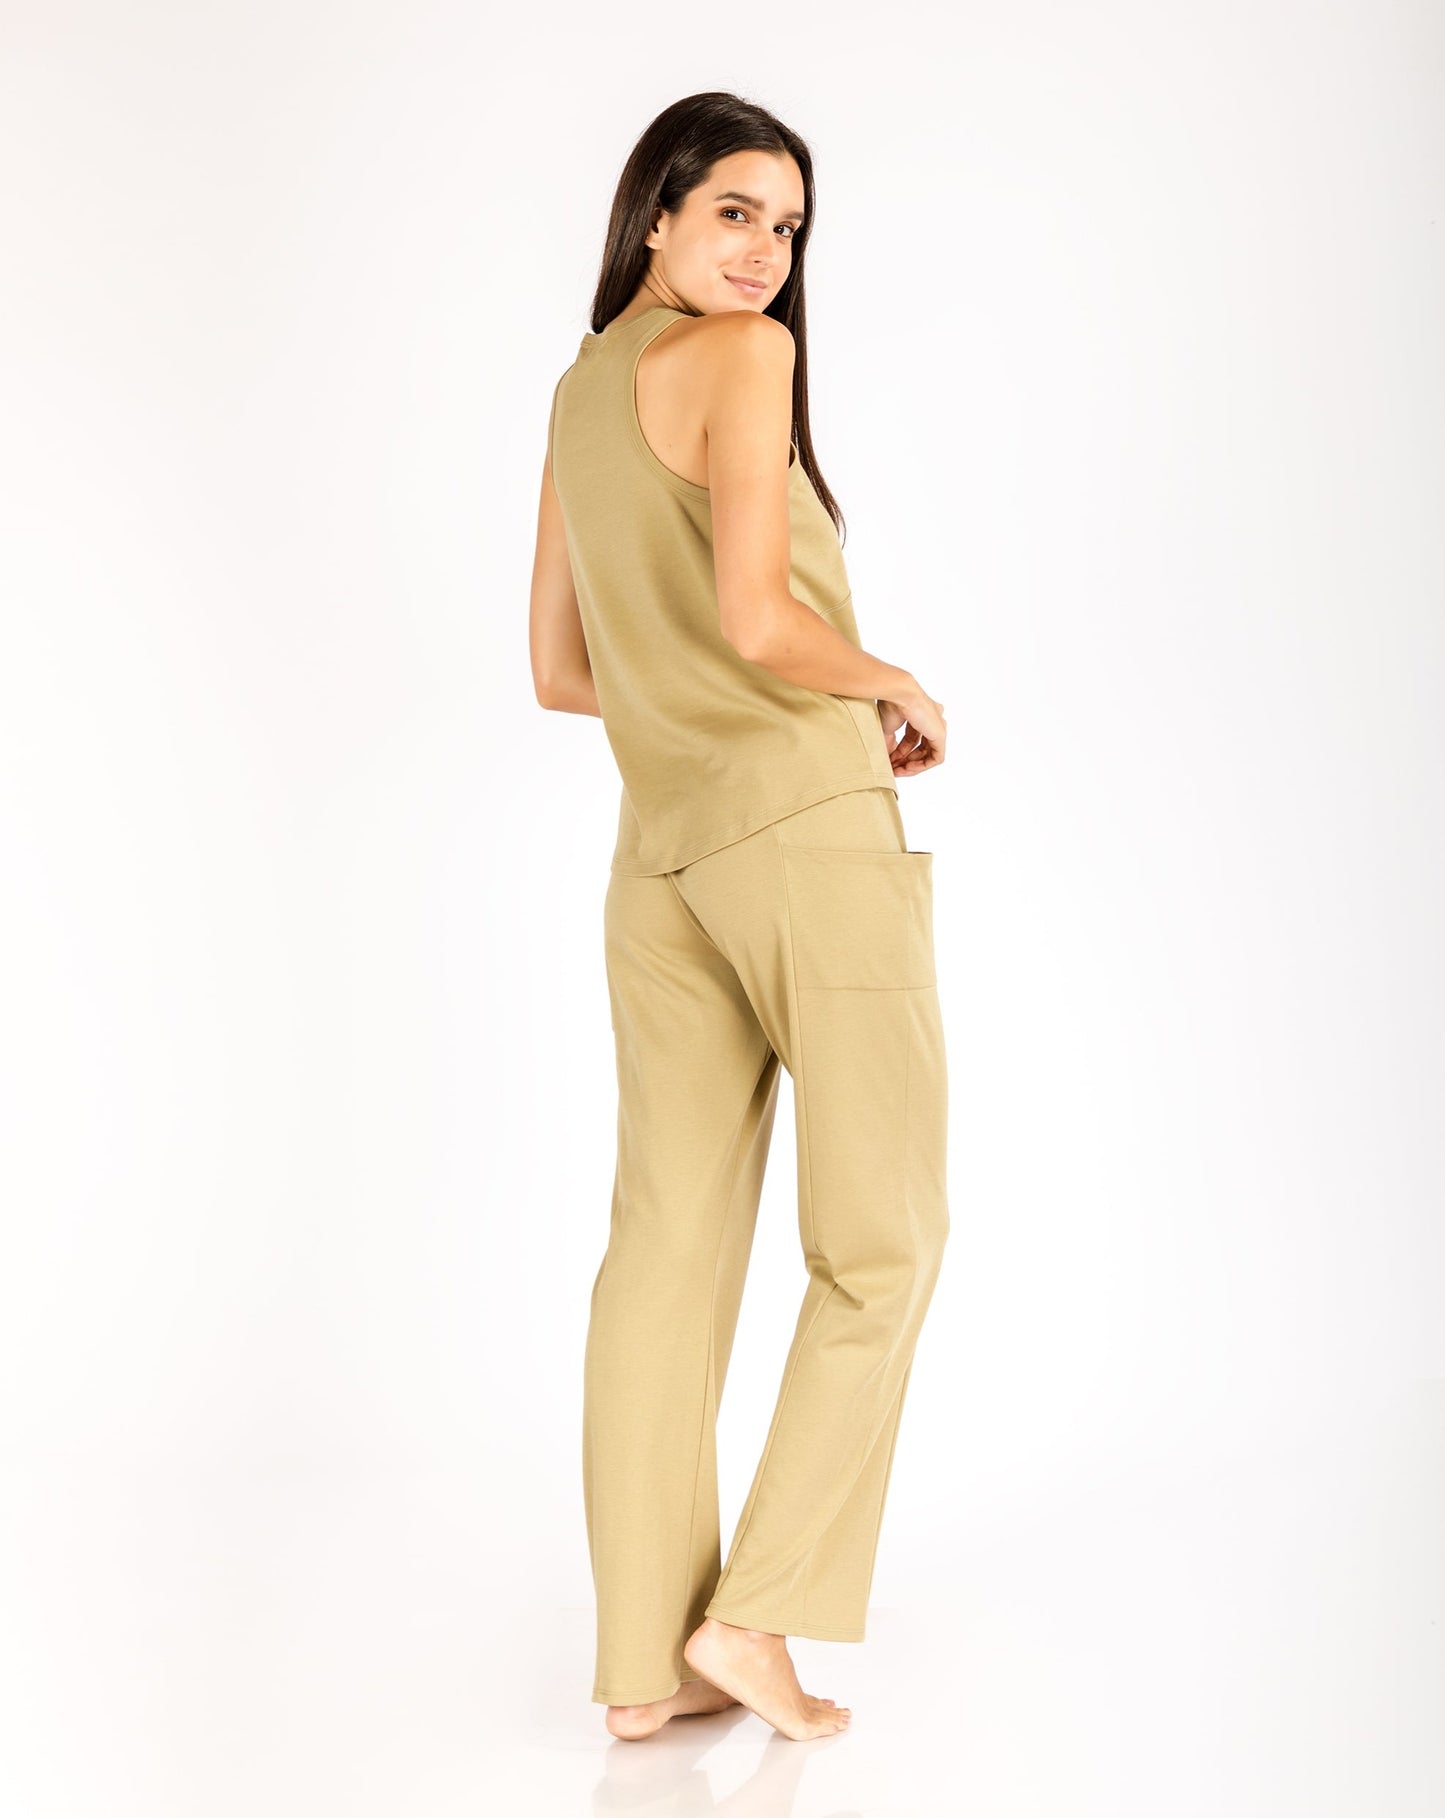 women_s-pajama-set-Straight-pant-with-pocket-detail-and-racer-neck-top-olive-Lavender-Dreams